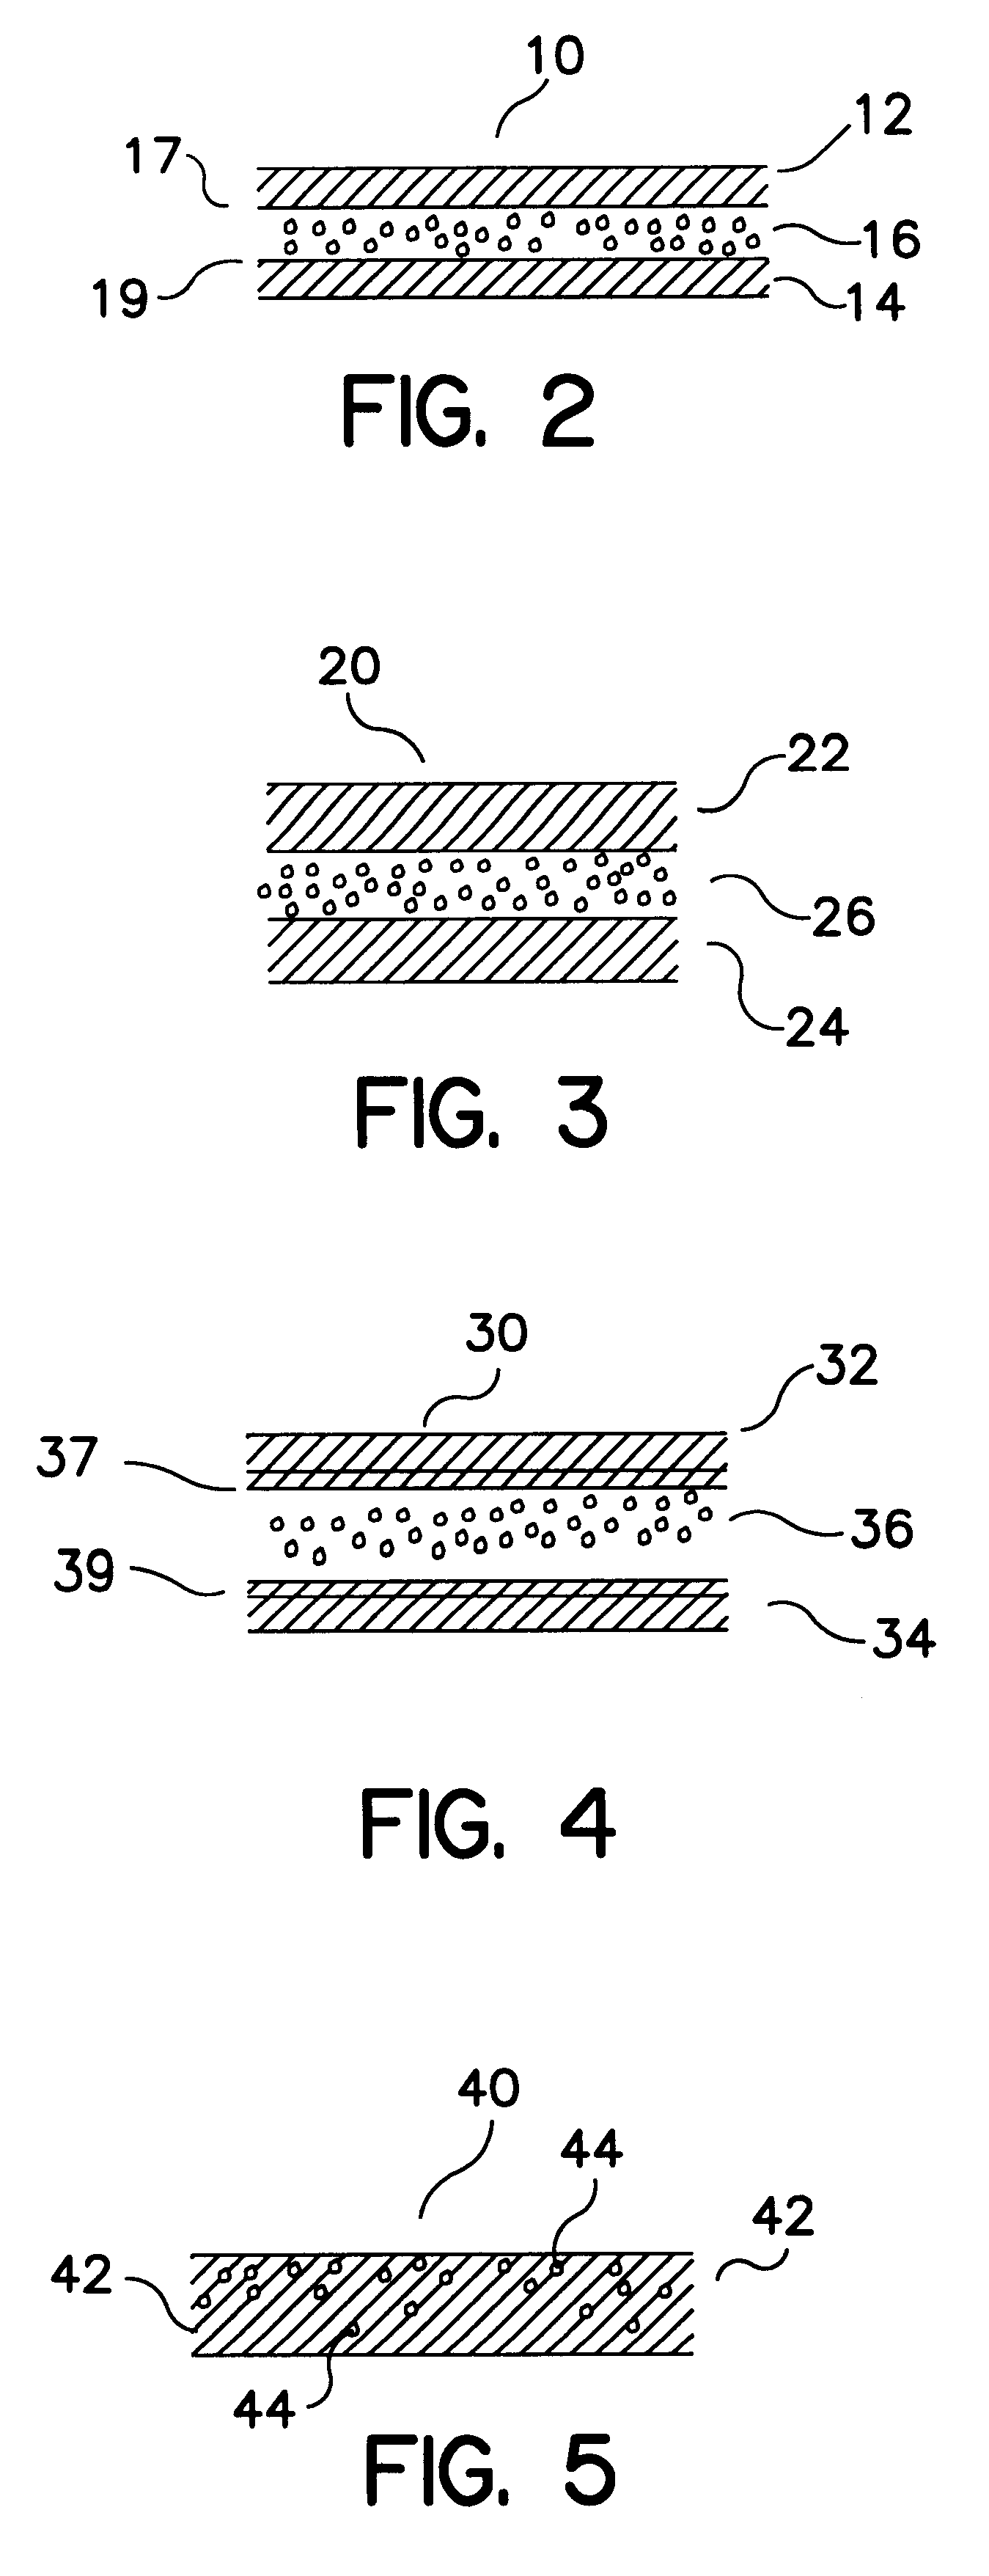 Absorbent structure and method